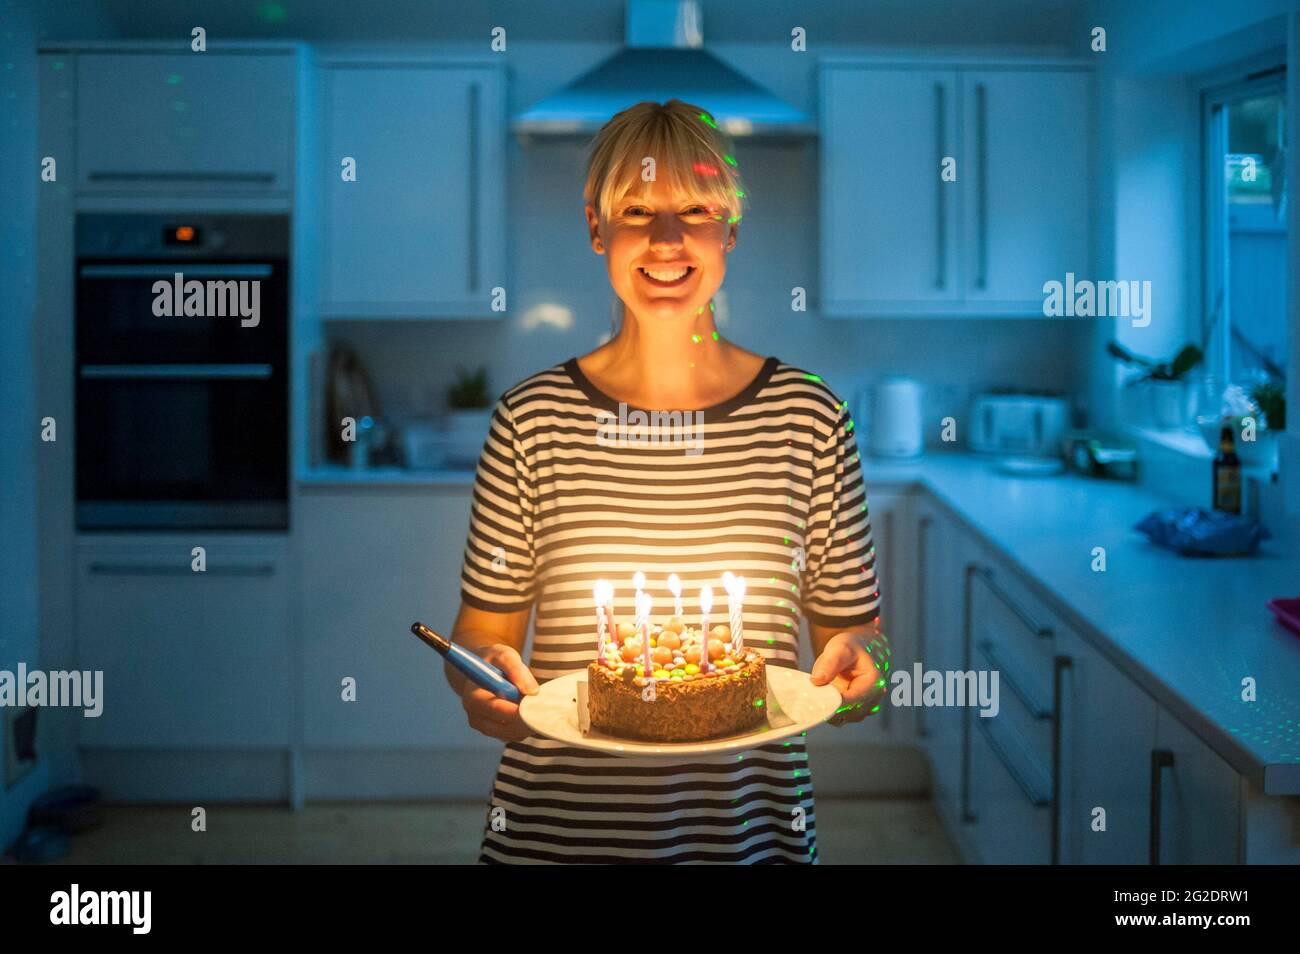 A mother carries a birthday cake after lighting the candles in her kitchen Stock Photo